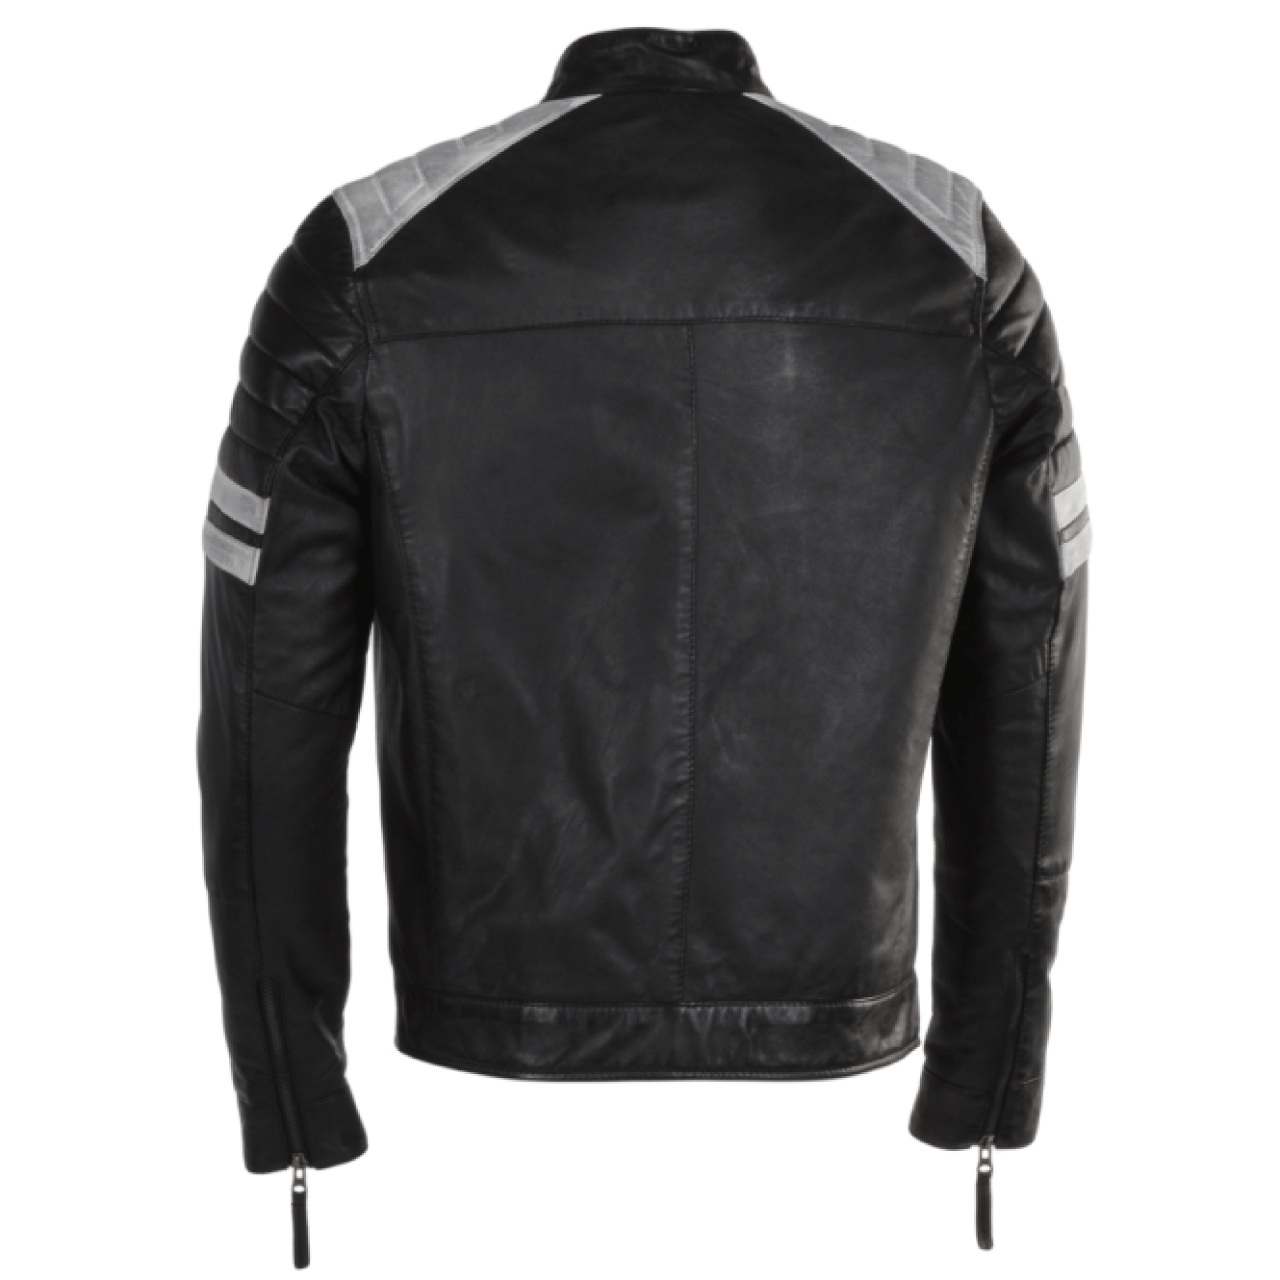 Leather bomber jacket in black with white stripes